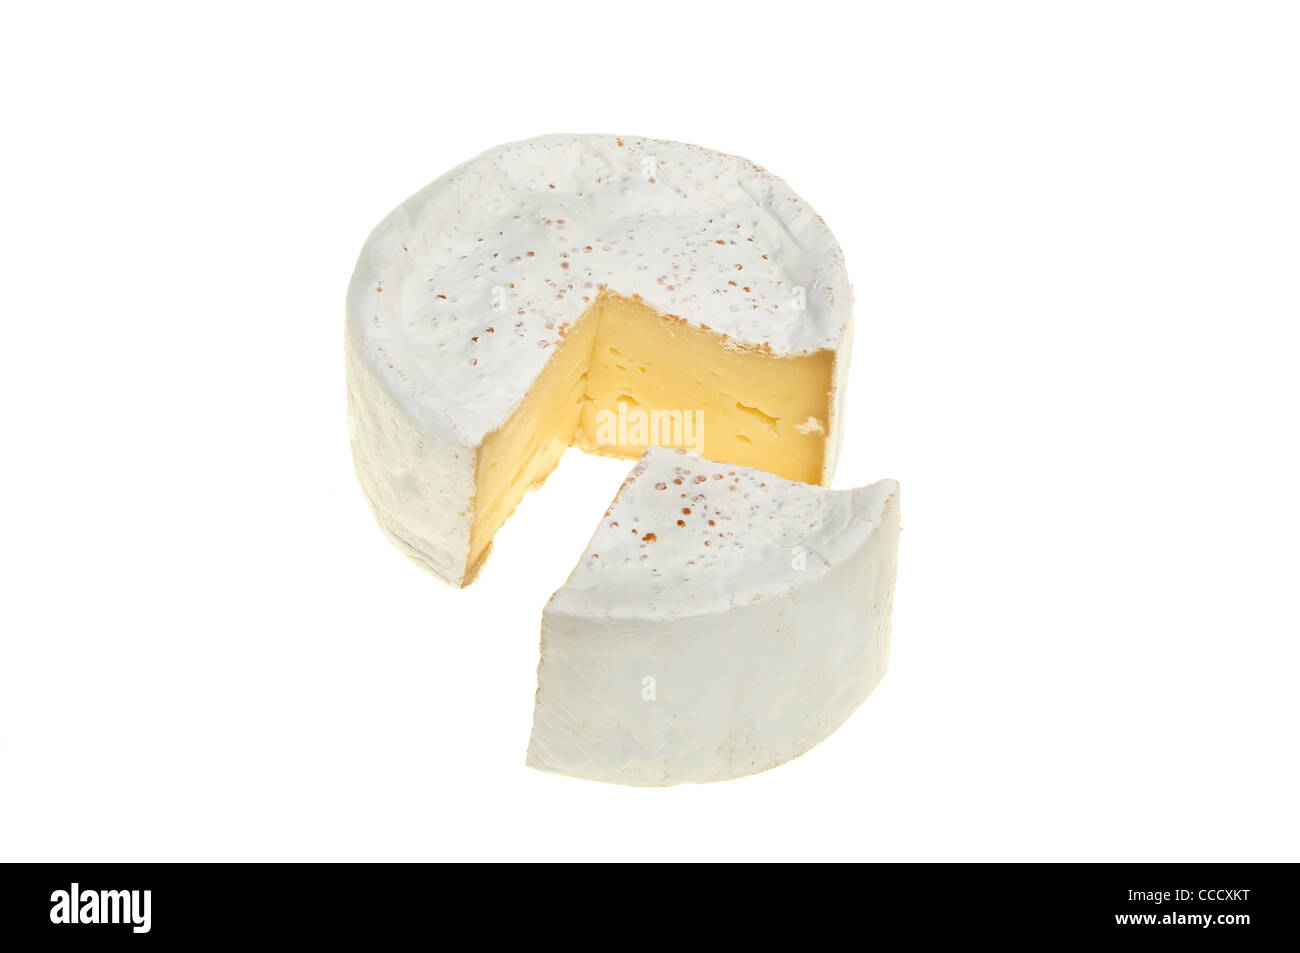 Round of camembert cheese with a segment cut out could be used as a pie chart Stock Photo